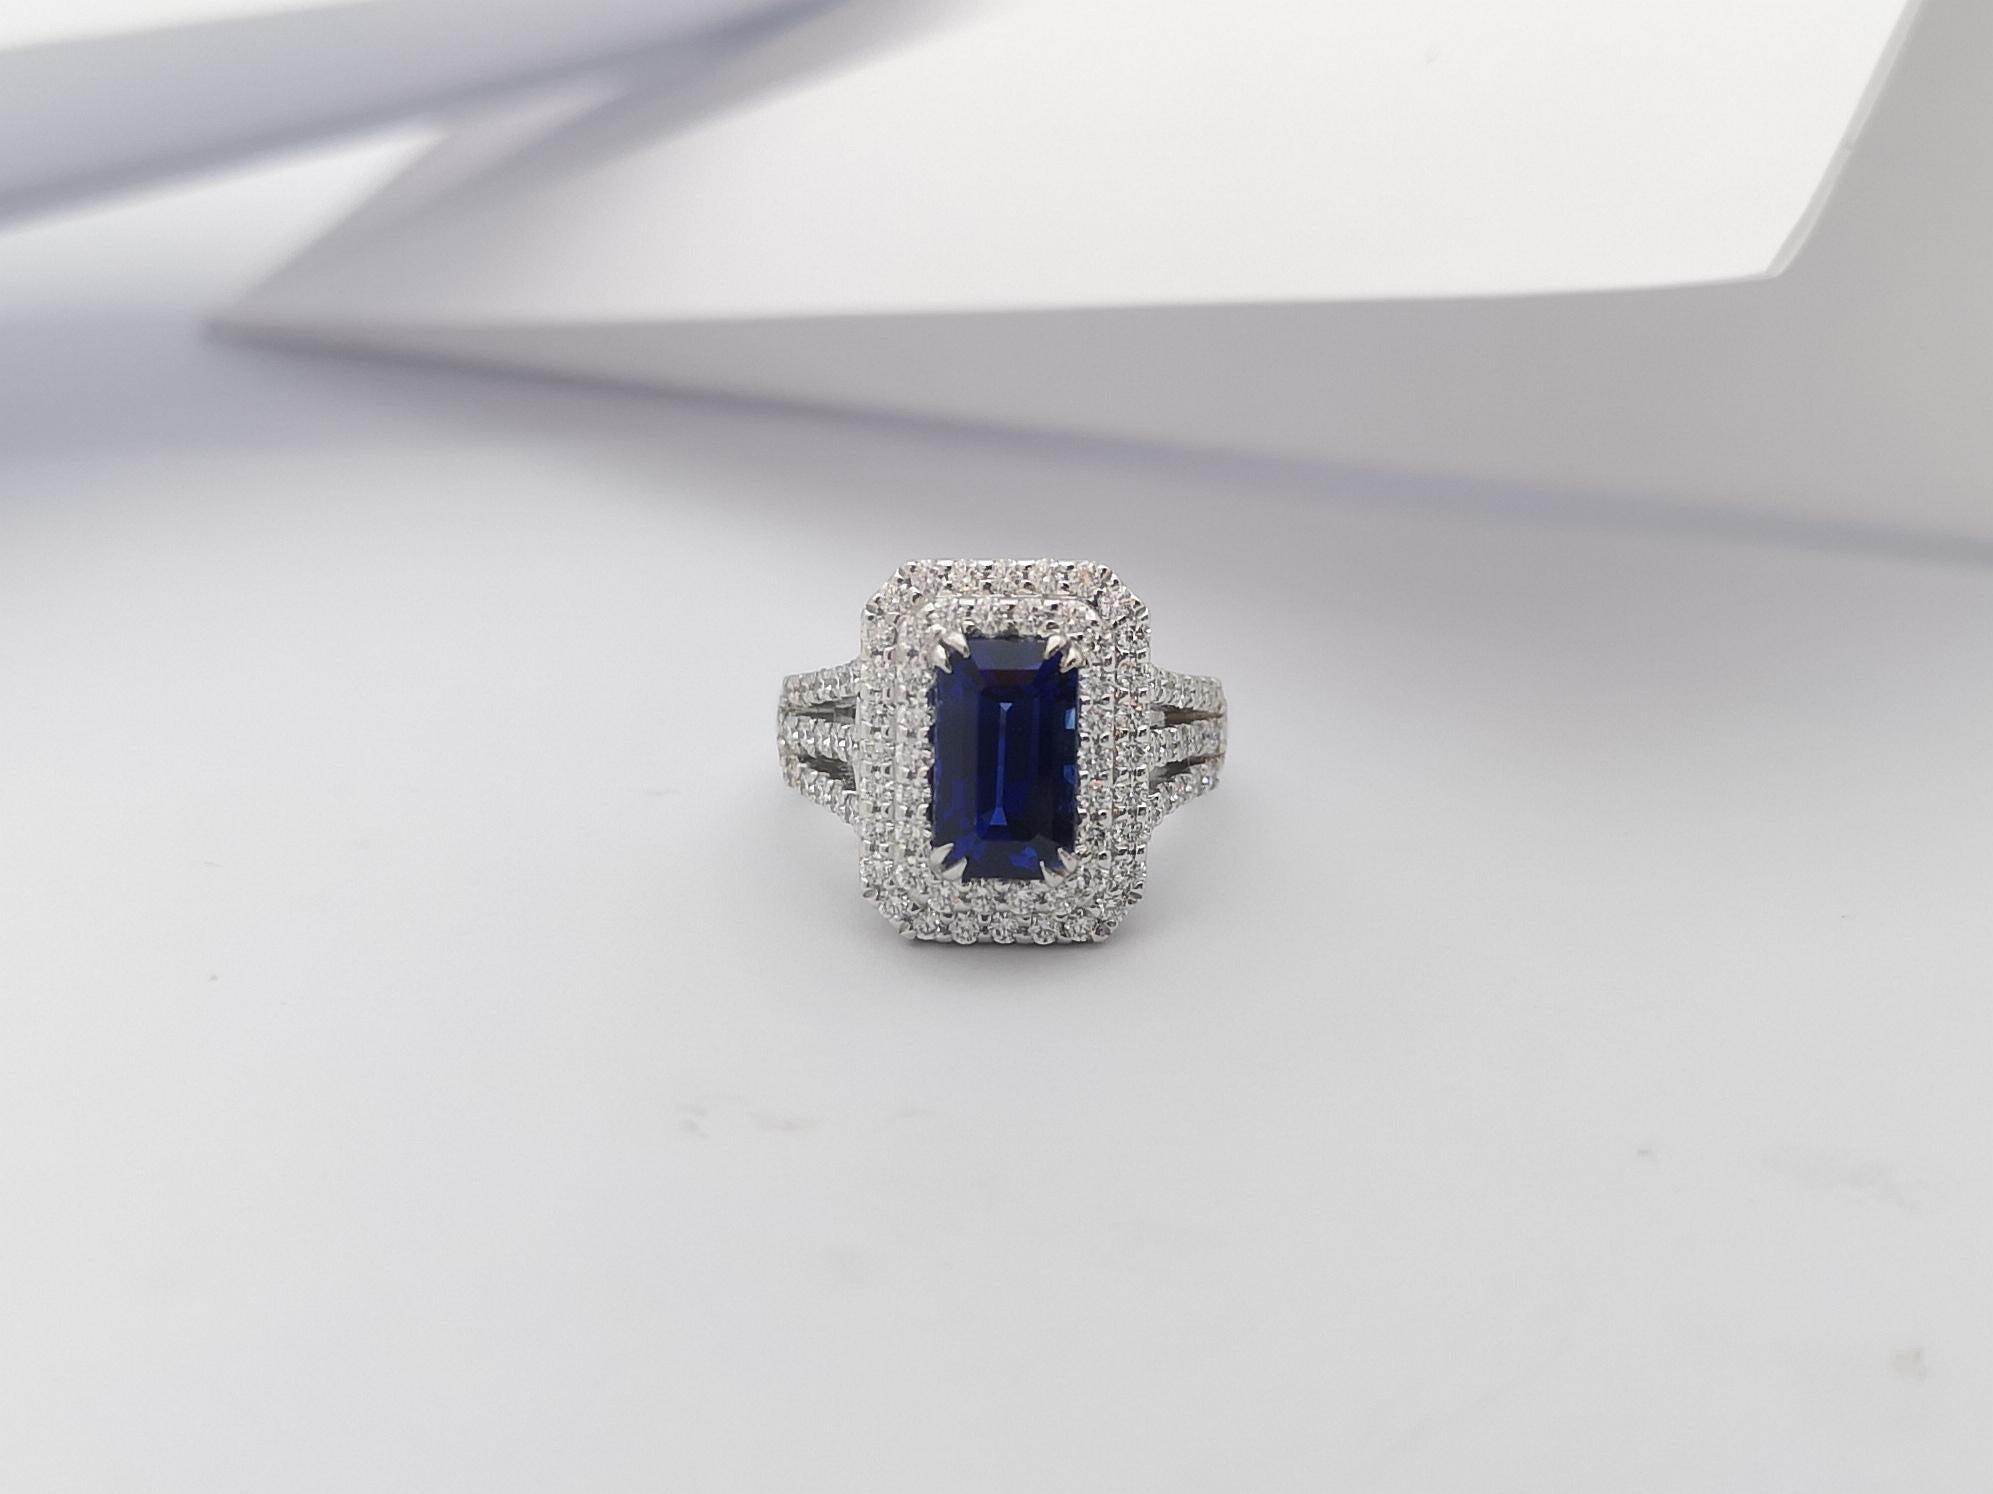 GIA Certified 3 Cts Blue Sapphire with Diamond Ring Set in 18 Karat White Gold For Sale 3